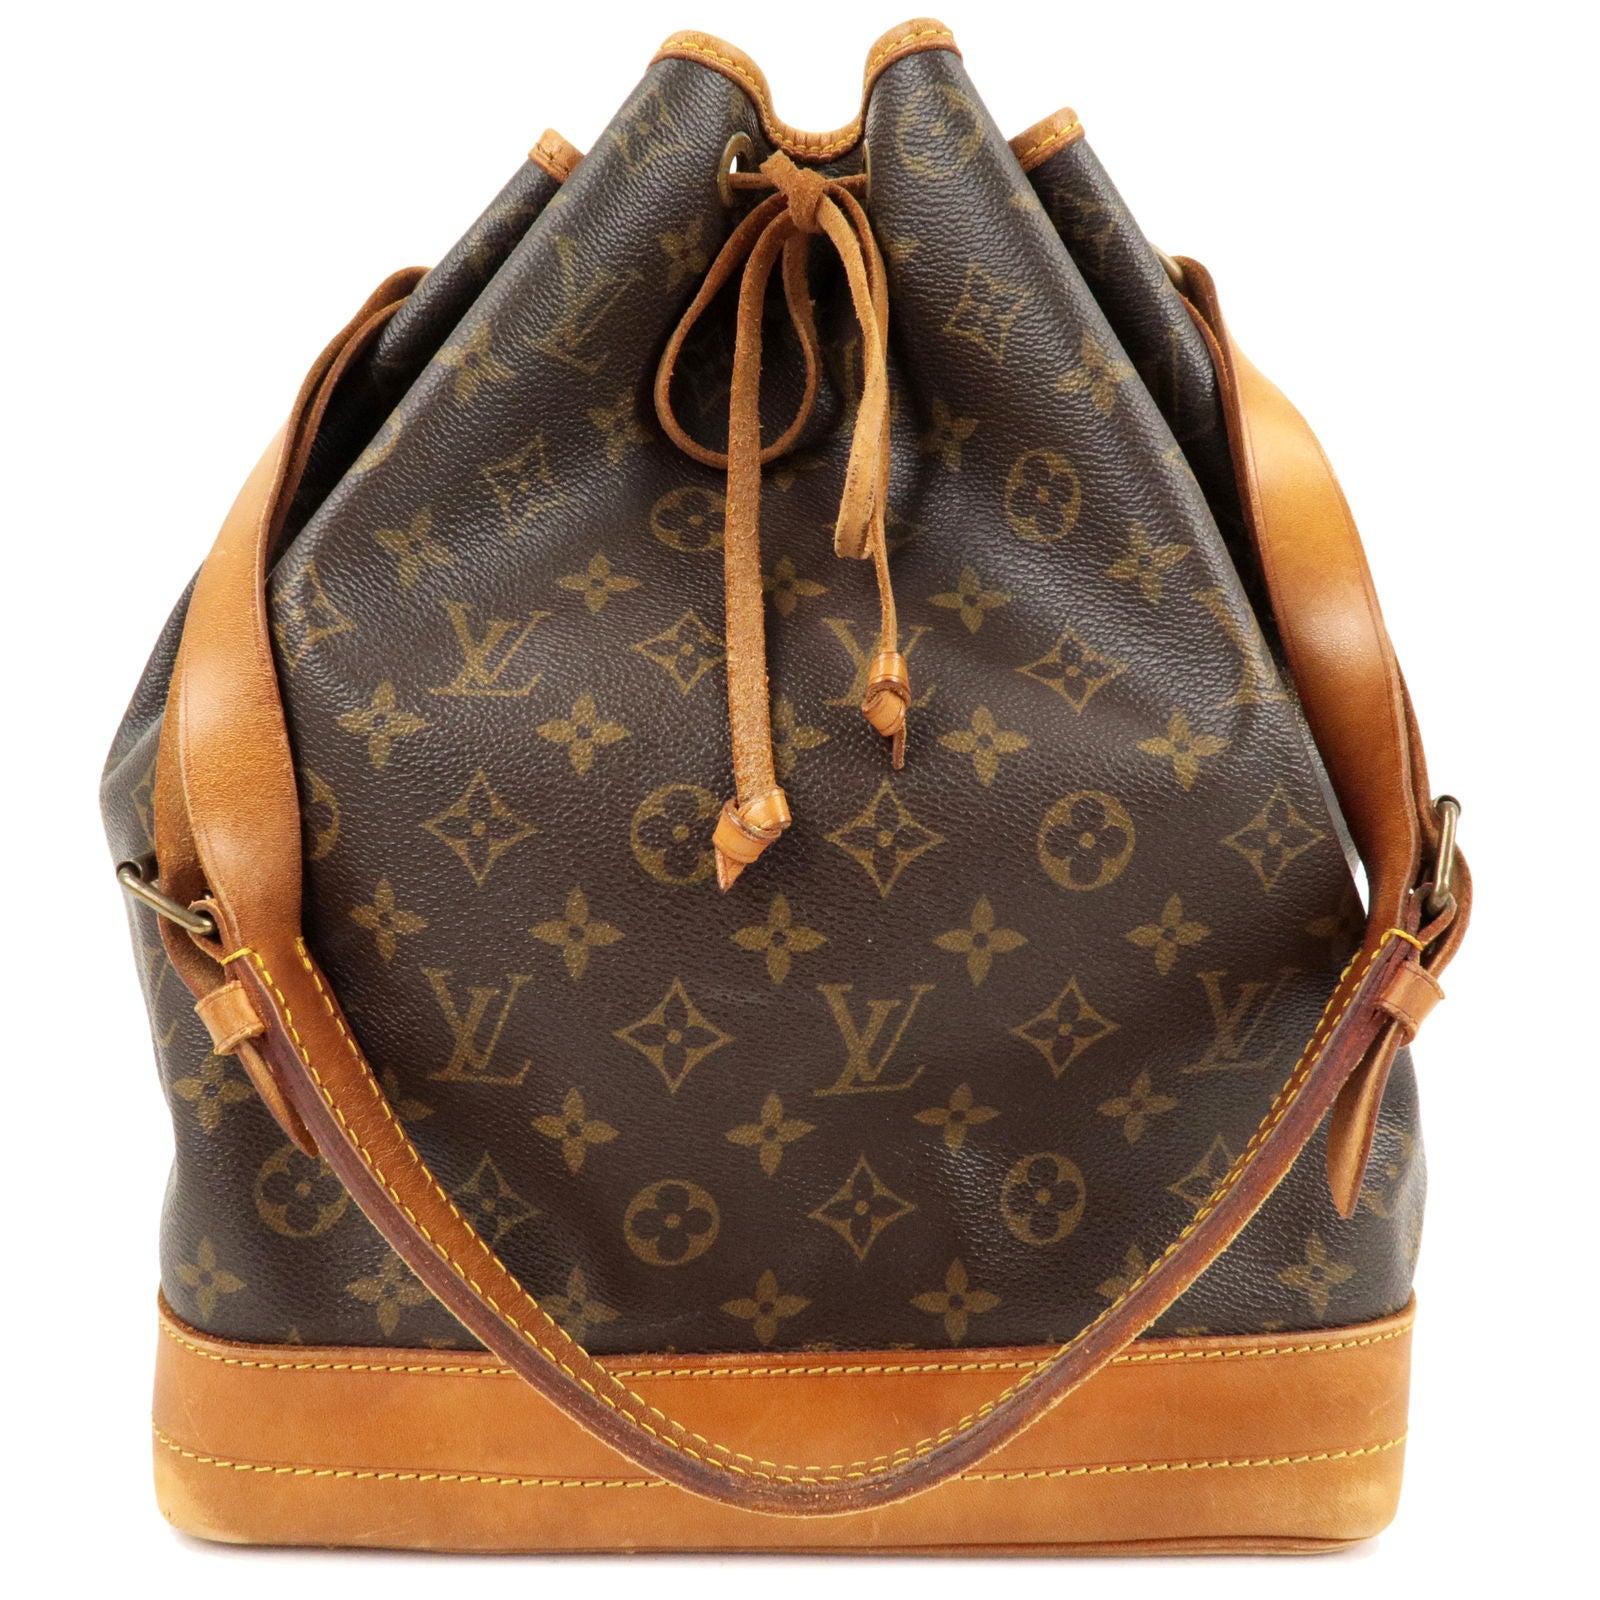 Small Louis Vuitton trunk - Des Voyages - Recent Added Items